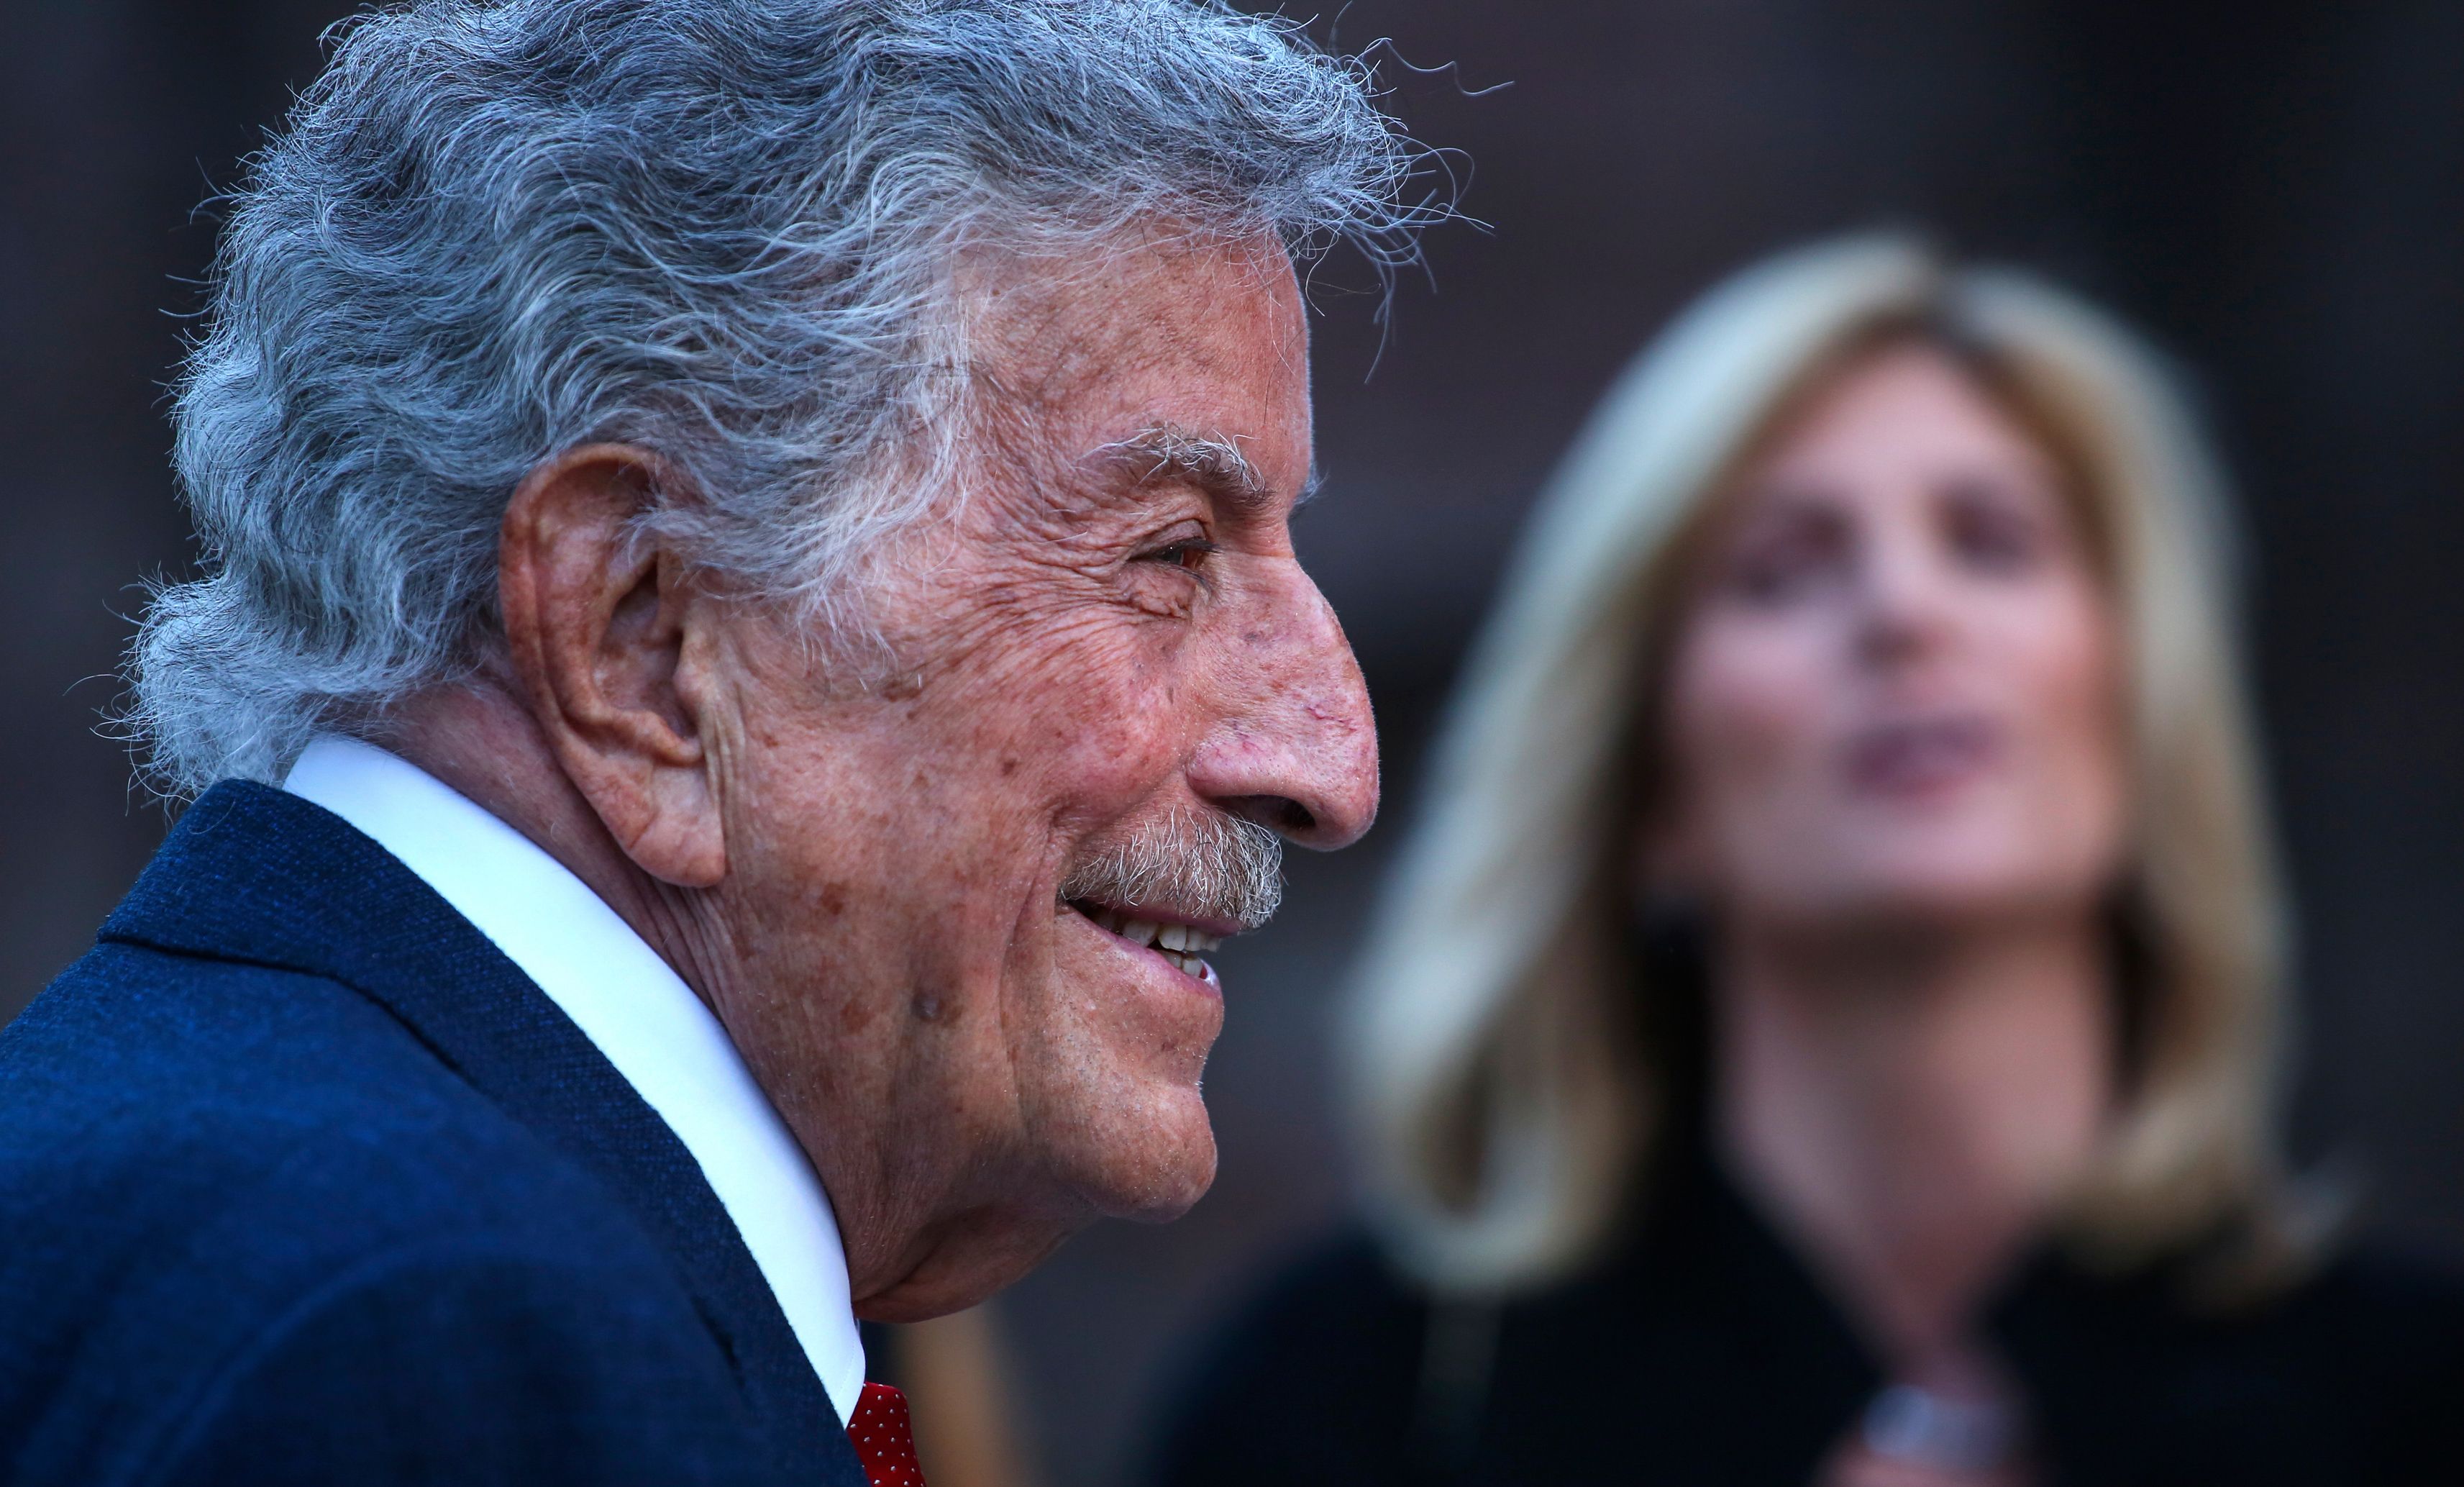 Tony Bennett at the opening celebration of the Statue of Liberty Museum on May 15, 2019, in New York. | Source: Getty Images